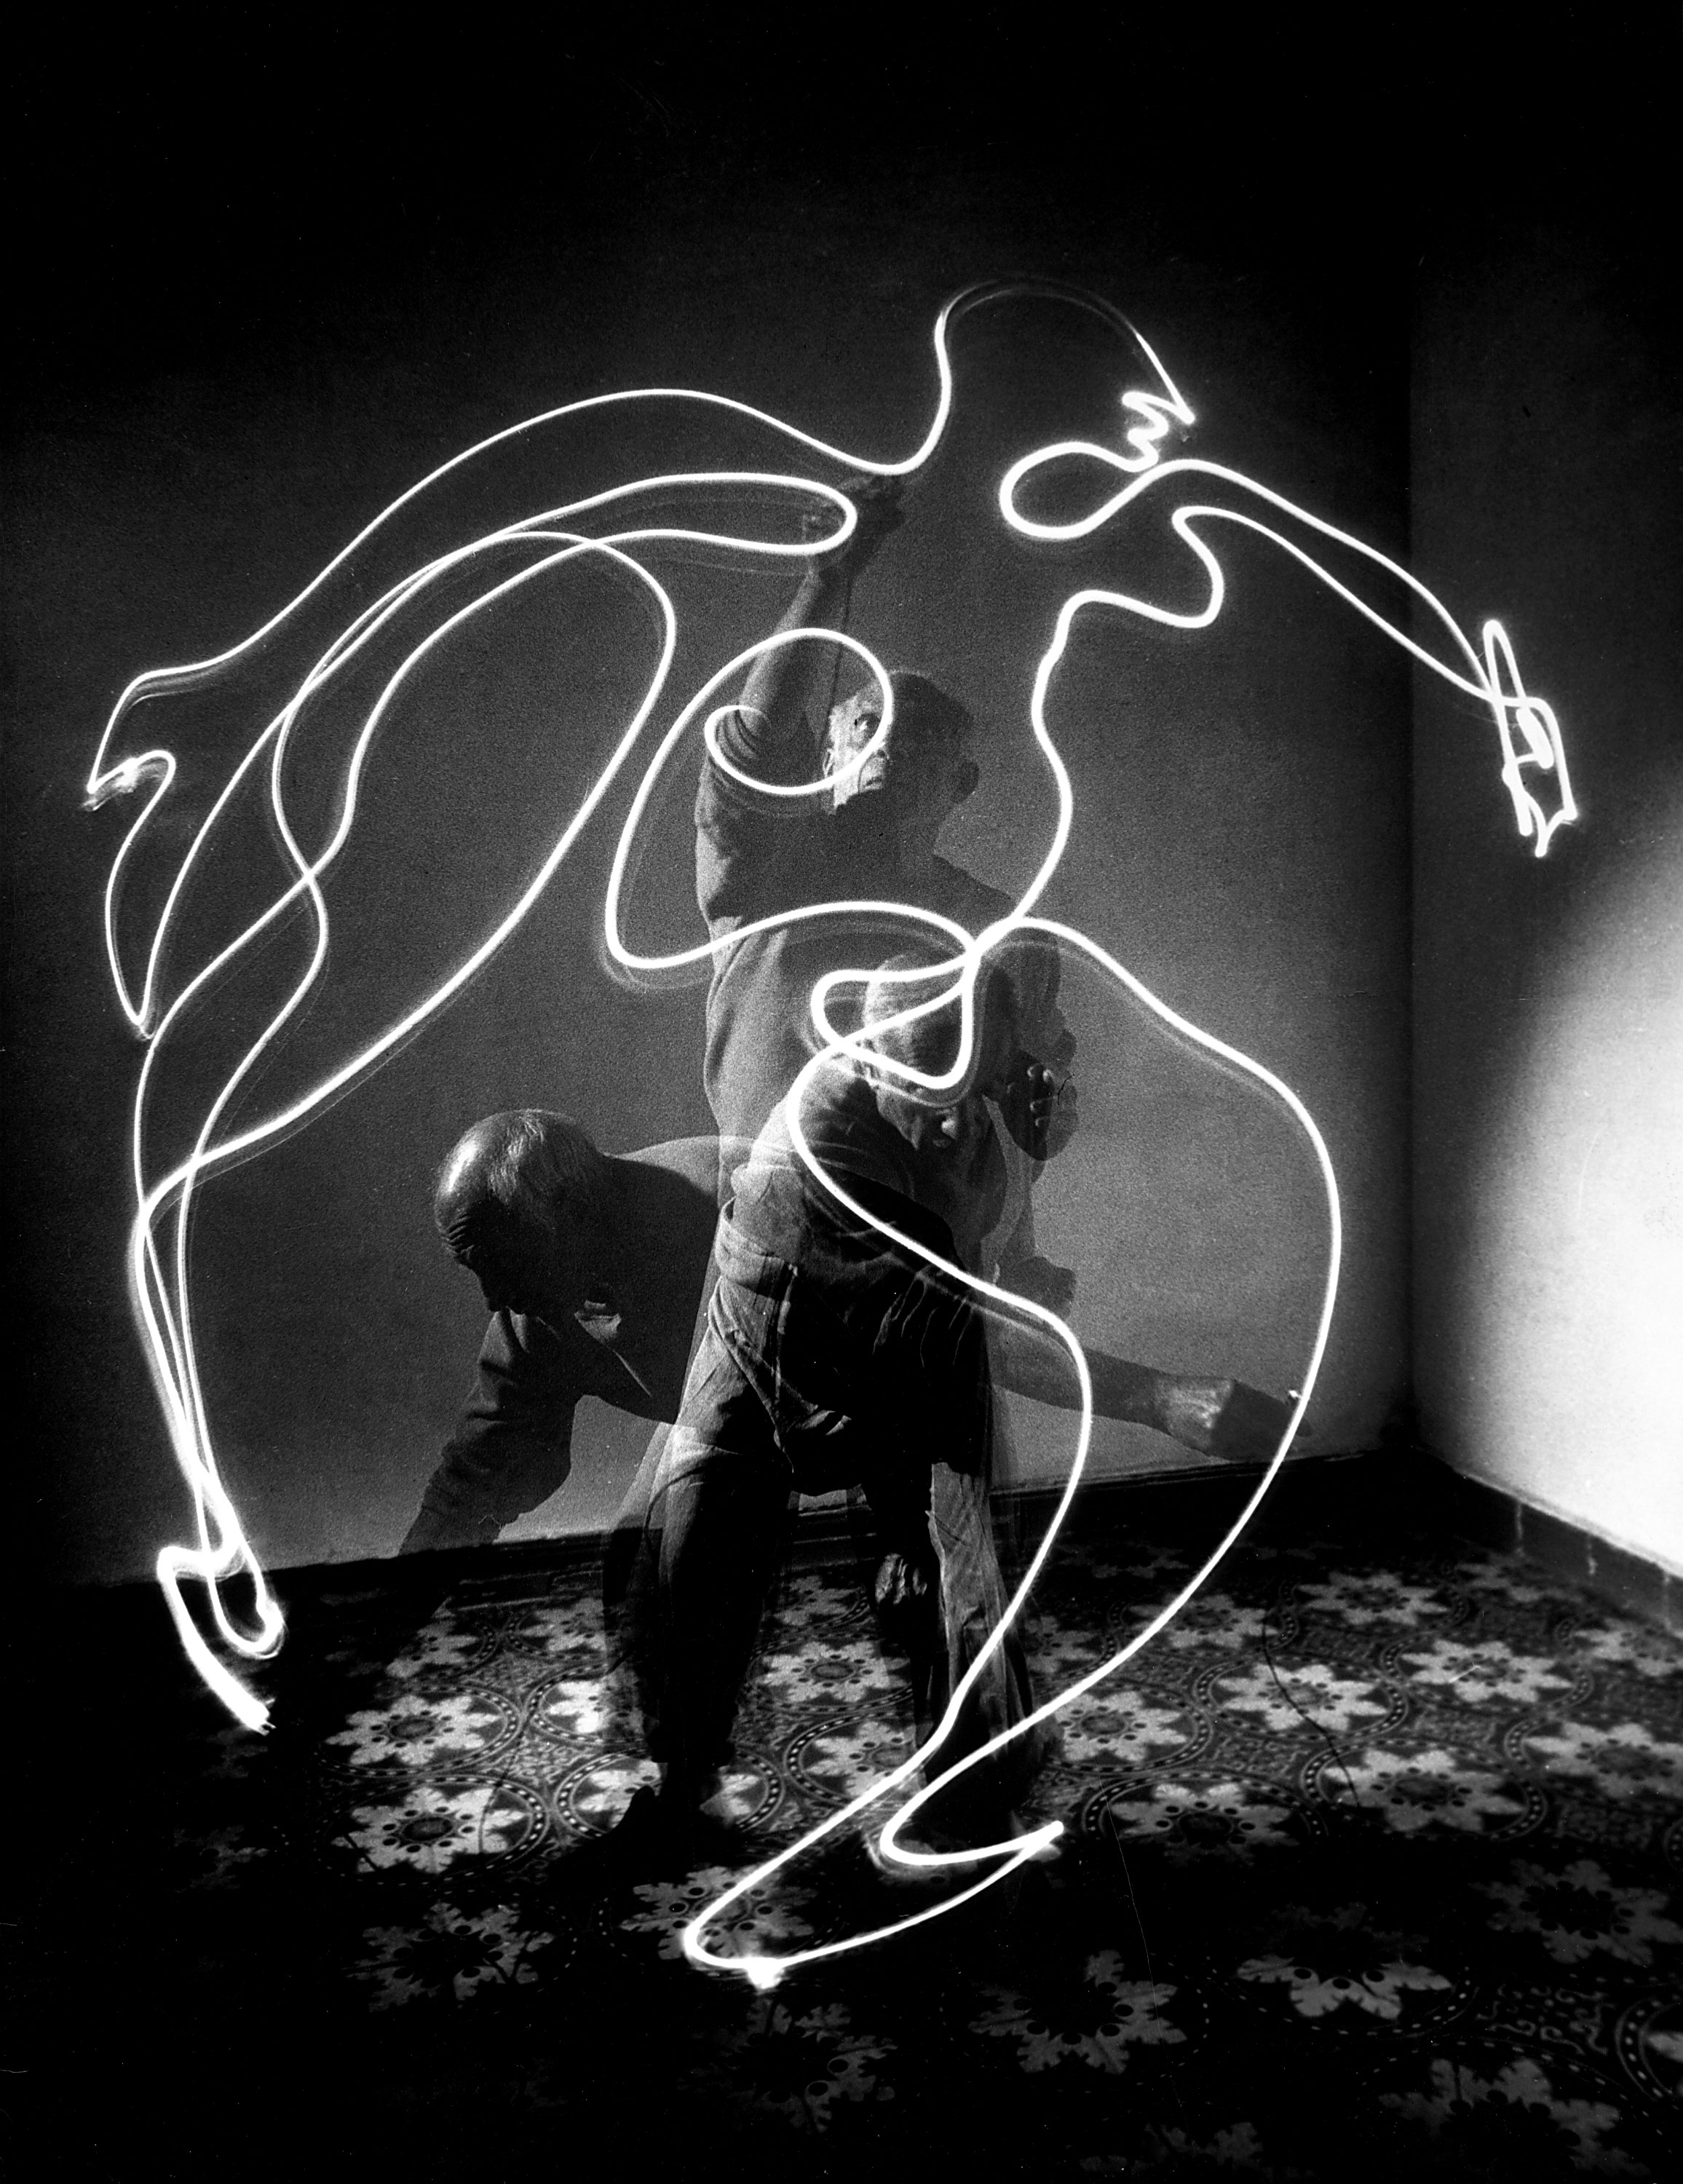 Multiple exposure photograph of Pablo Picasso using a small flashlight to "draw" a figure in the air in 1949.